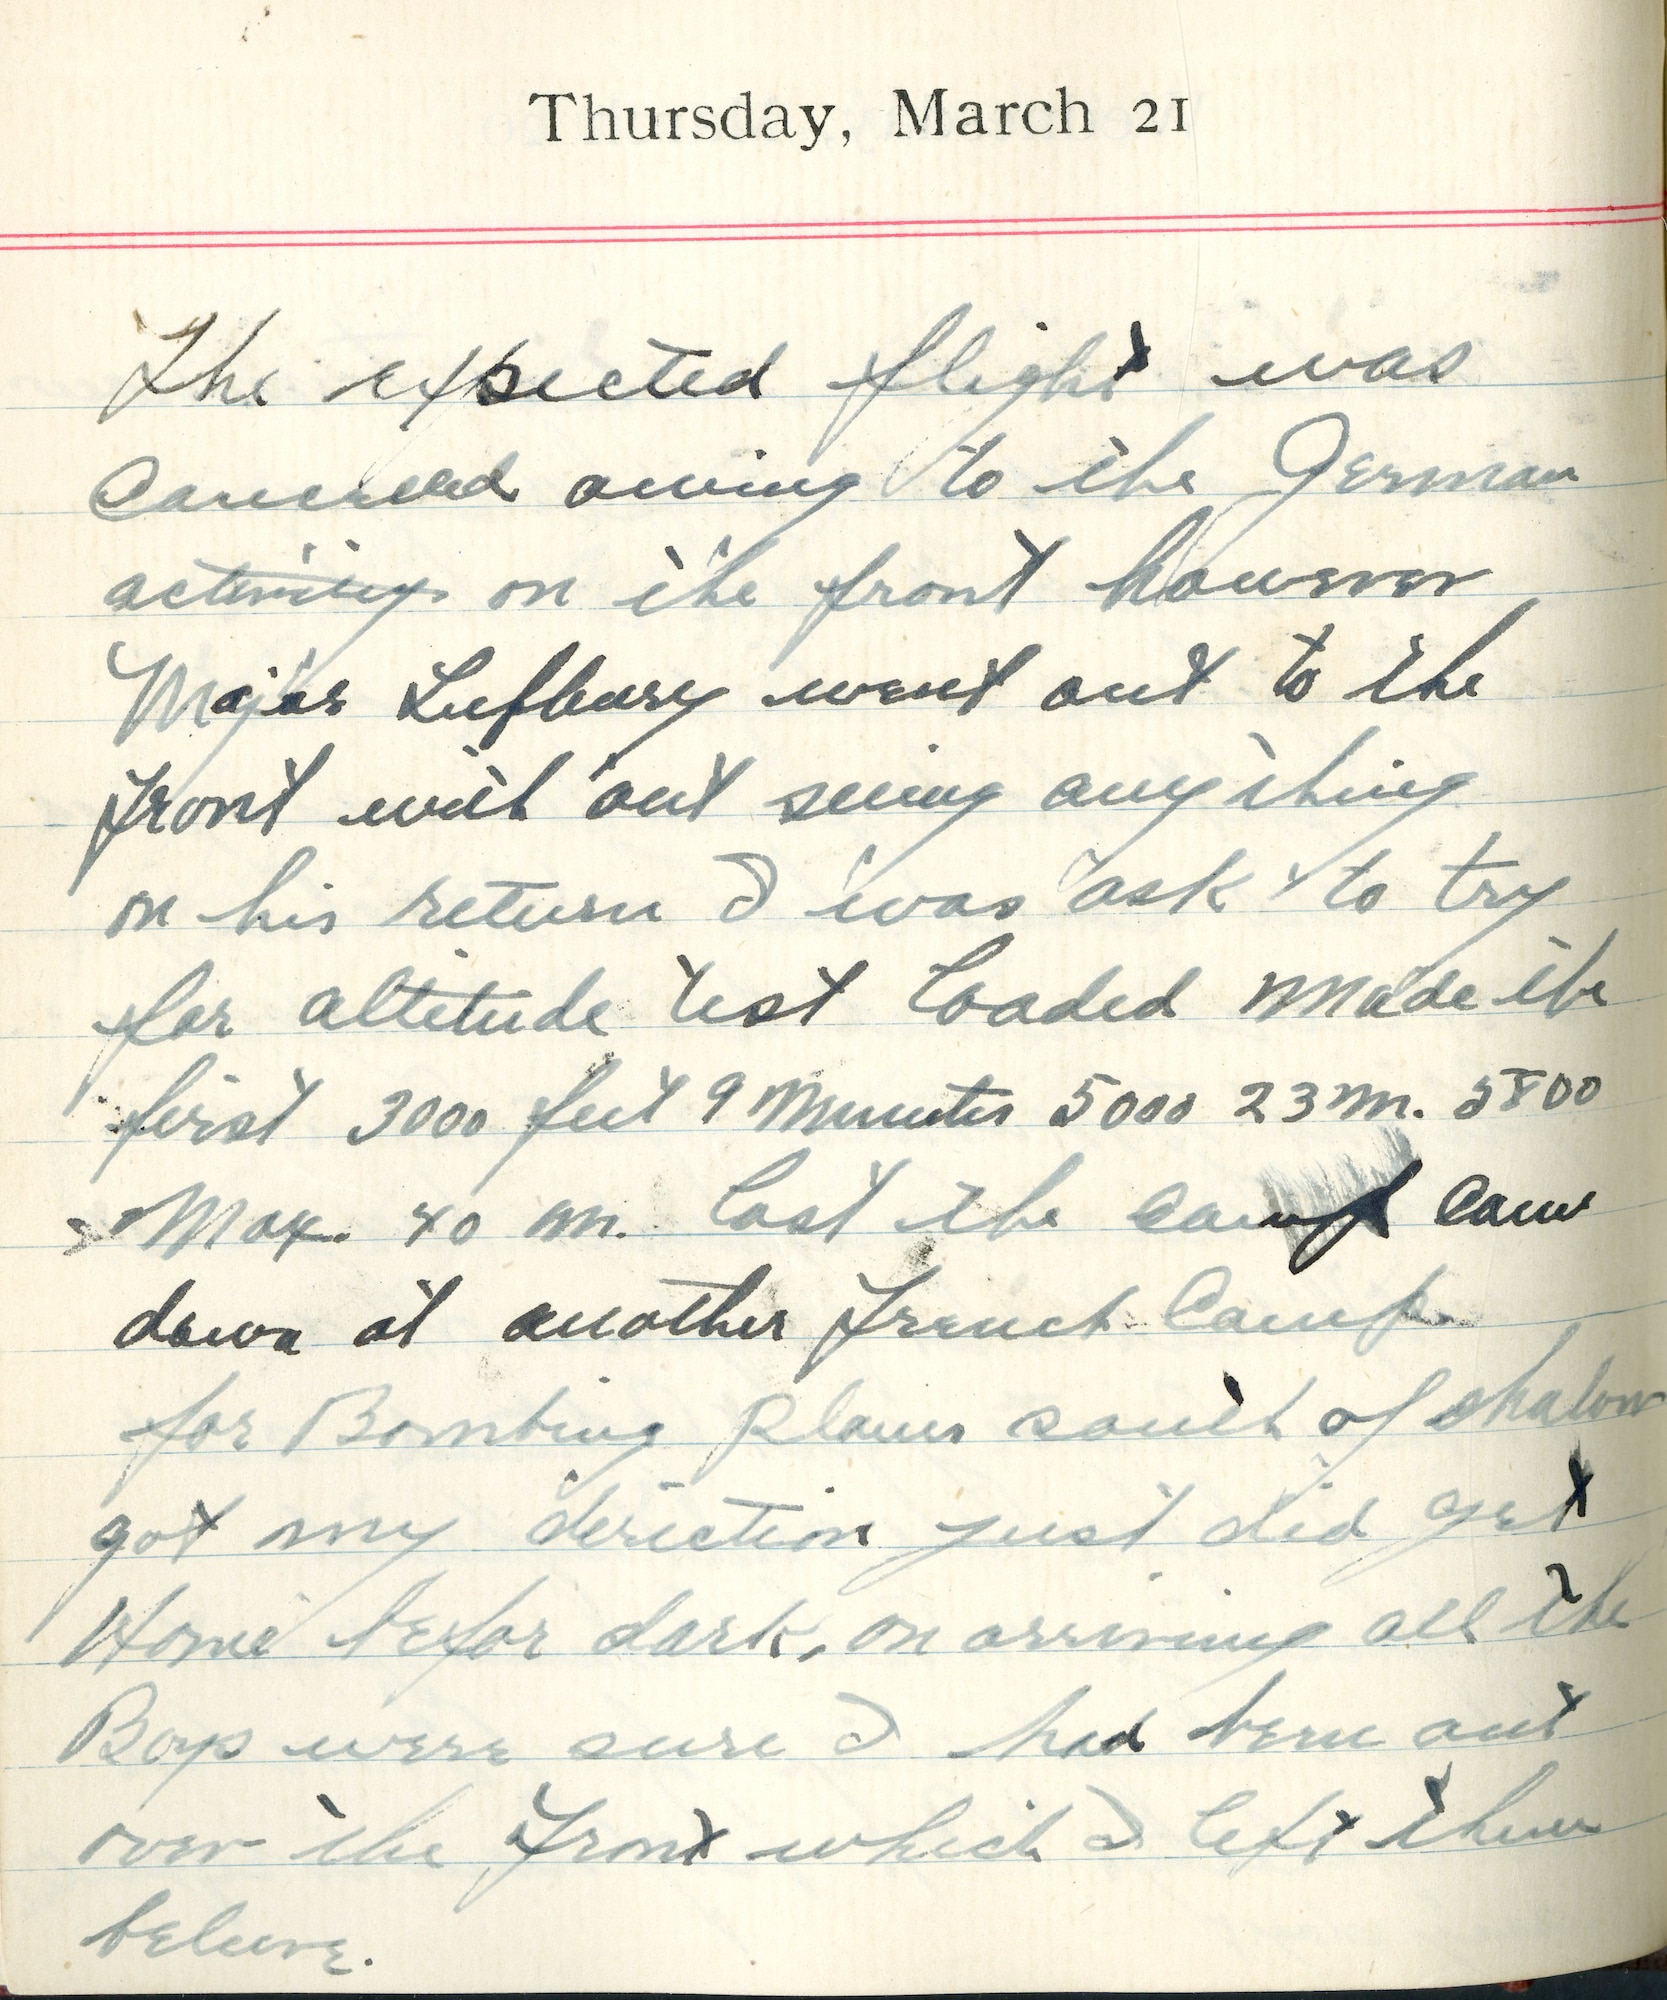 Capt. Edward V. Rickenbacker's 1918 wartime diary entry. (03/21/1918).

The expected flight was canceled owing to the German activity on the front. However, Major Lufbery went out to the front without seeing anything.  On his return I was asked to try for altitude test loaded.  Made the first 3000 feet 9 minutes, 5000 [feet] 23 m., 5800 [feet] max 40 m.  Lost the camp.  Came down at another French camp for bombing planes south of Chalons.  Got my direction.  Just did get home before dark.  On arriving, all the boys were sure I had been out over the front which I let them believe.